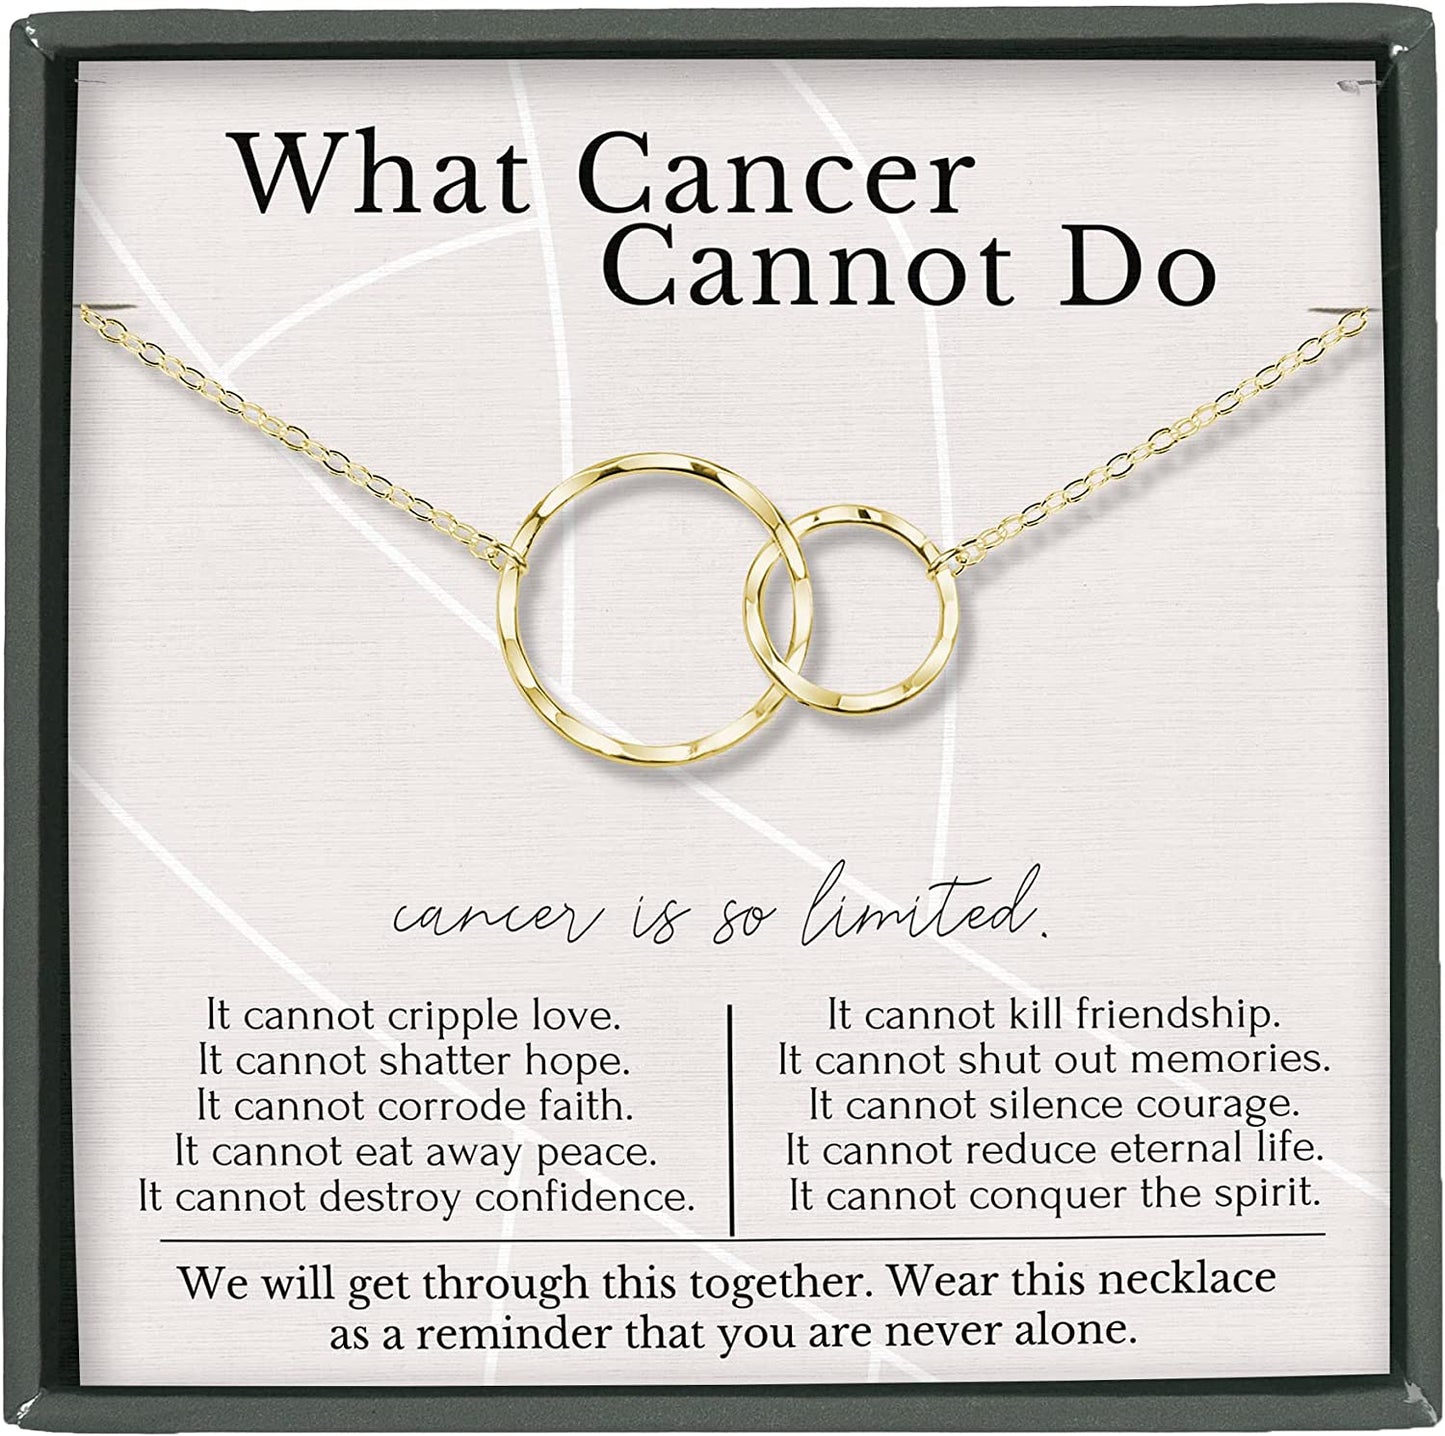 Necklace for Women for Courage Against Cancer - Inspirational Jewelry Survivor Necklaces - Cancer Gifts for Friends, Mom, Daughter, Chemo Patients - Meaningful Caring Message